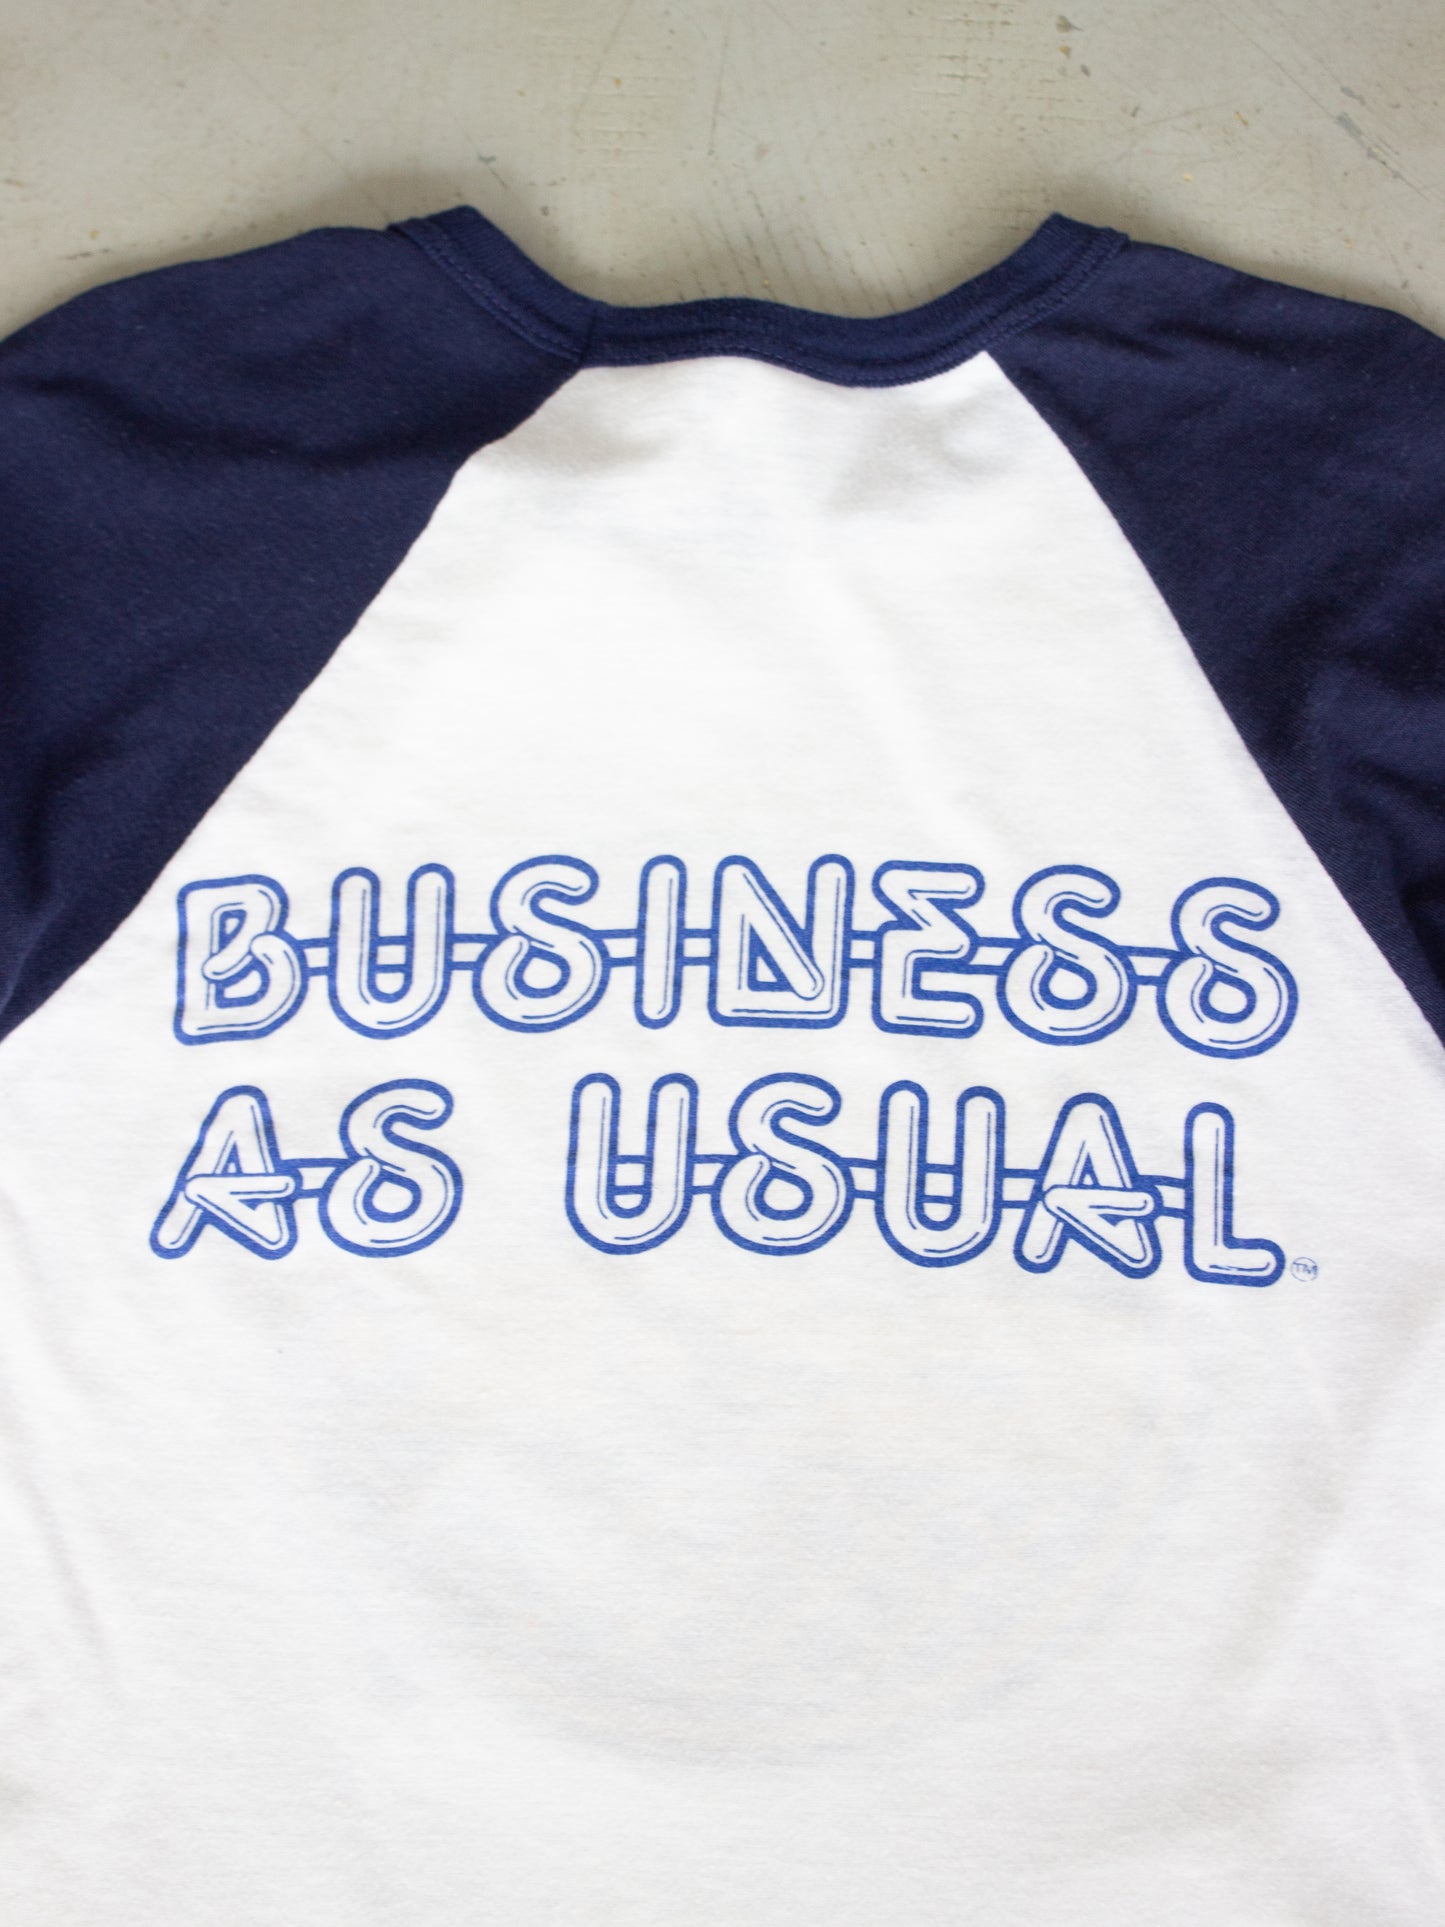 1980's Men At Work 'Business As Usual' Raglan Tour Tee (Small XSmall)